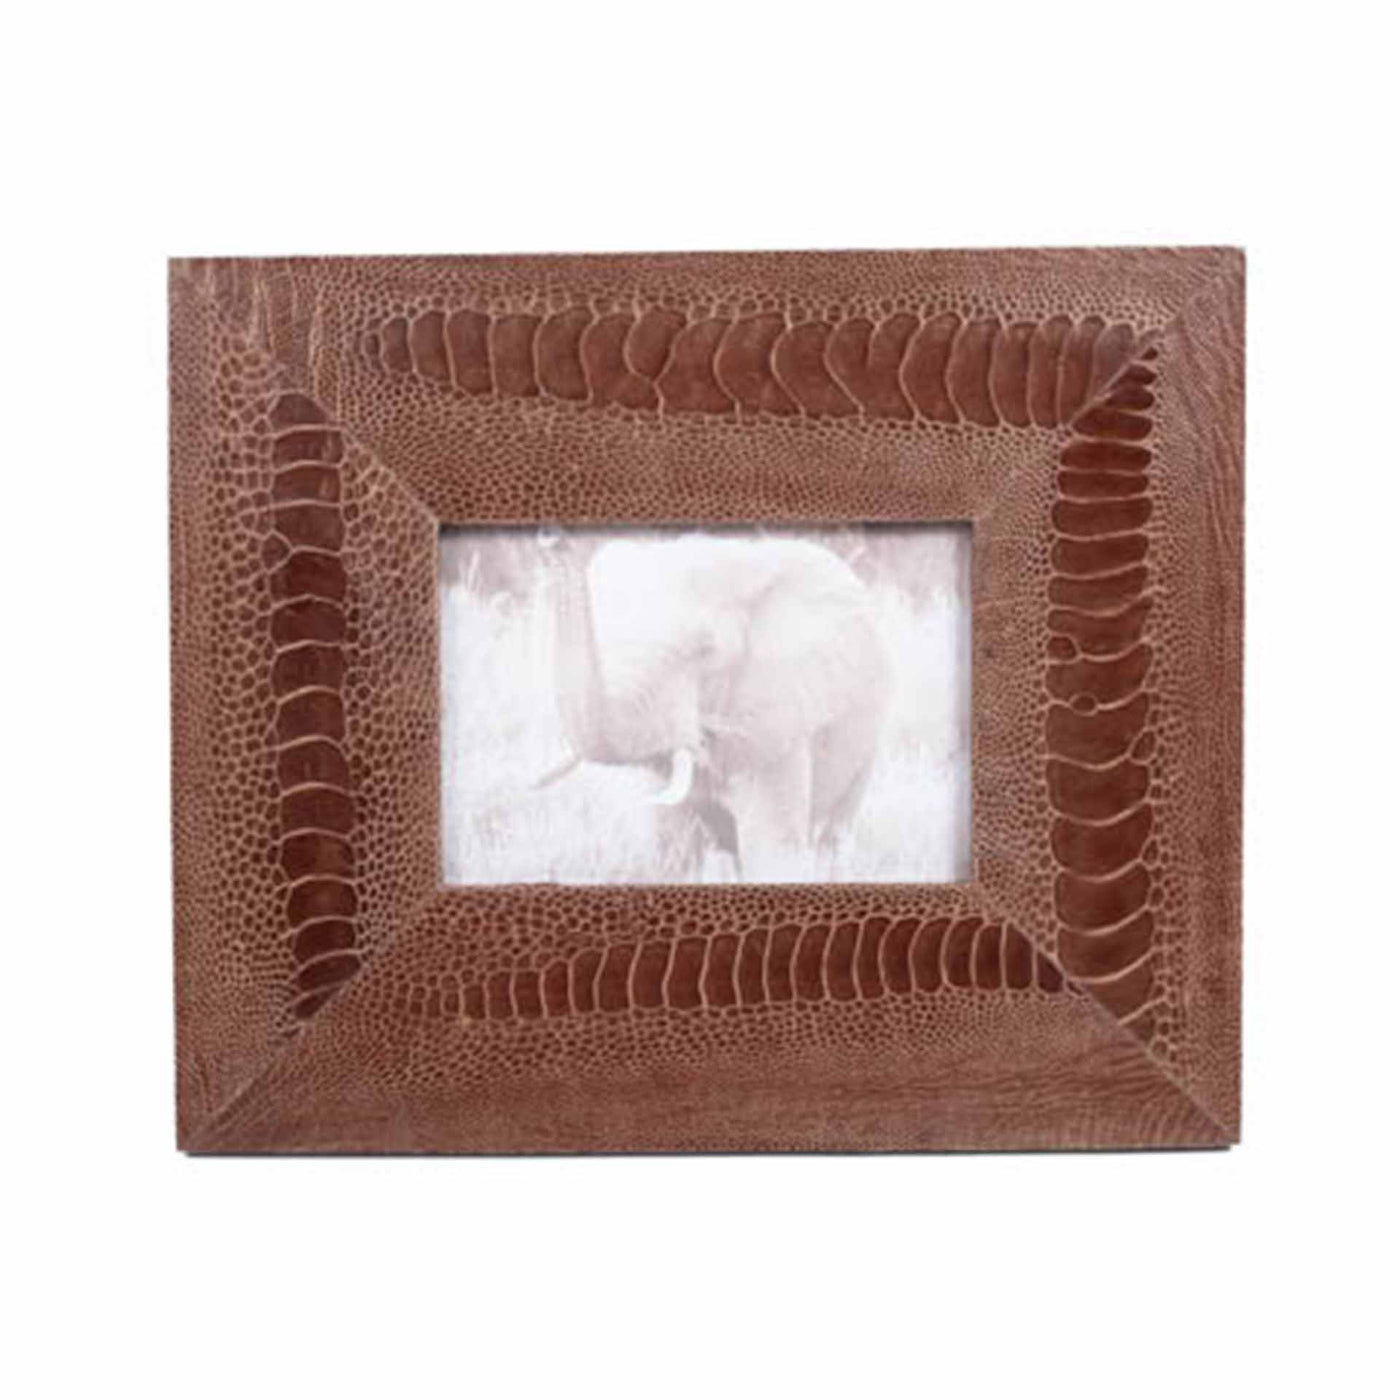 Ostrich Shin Leather Photo Frame - Brown